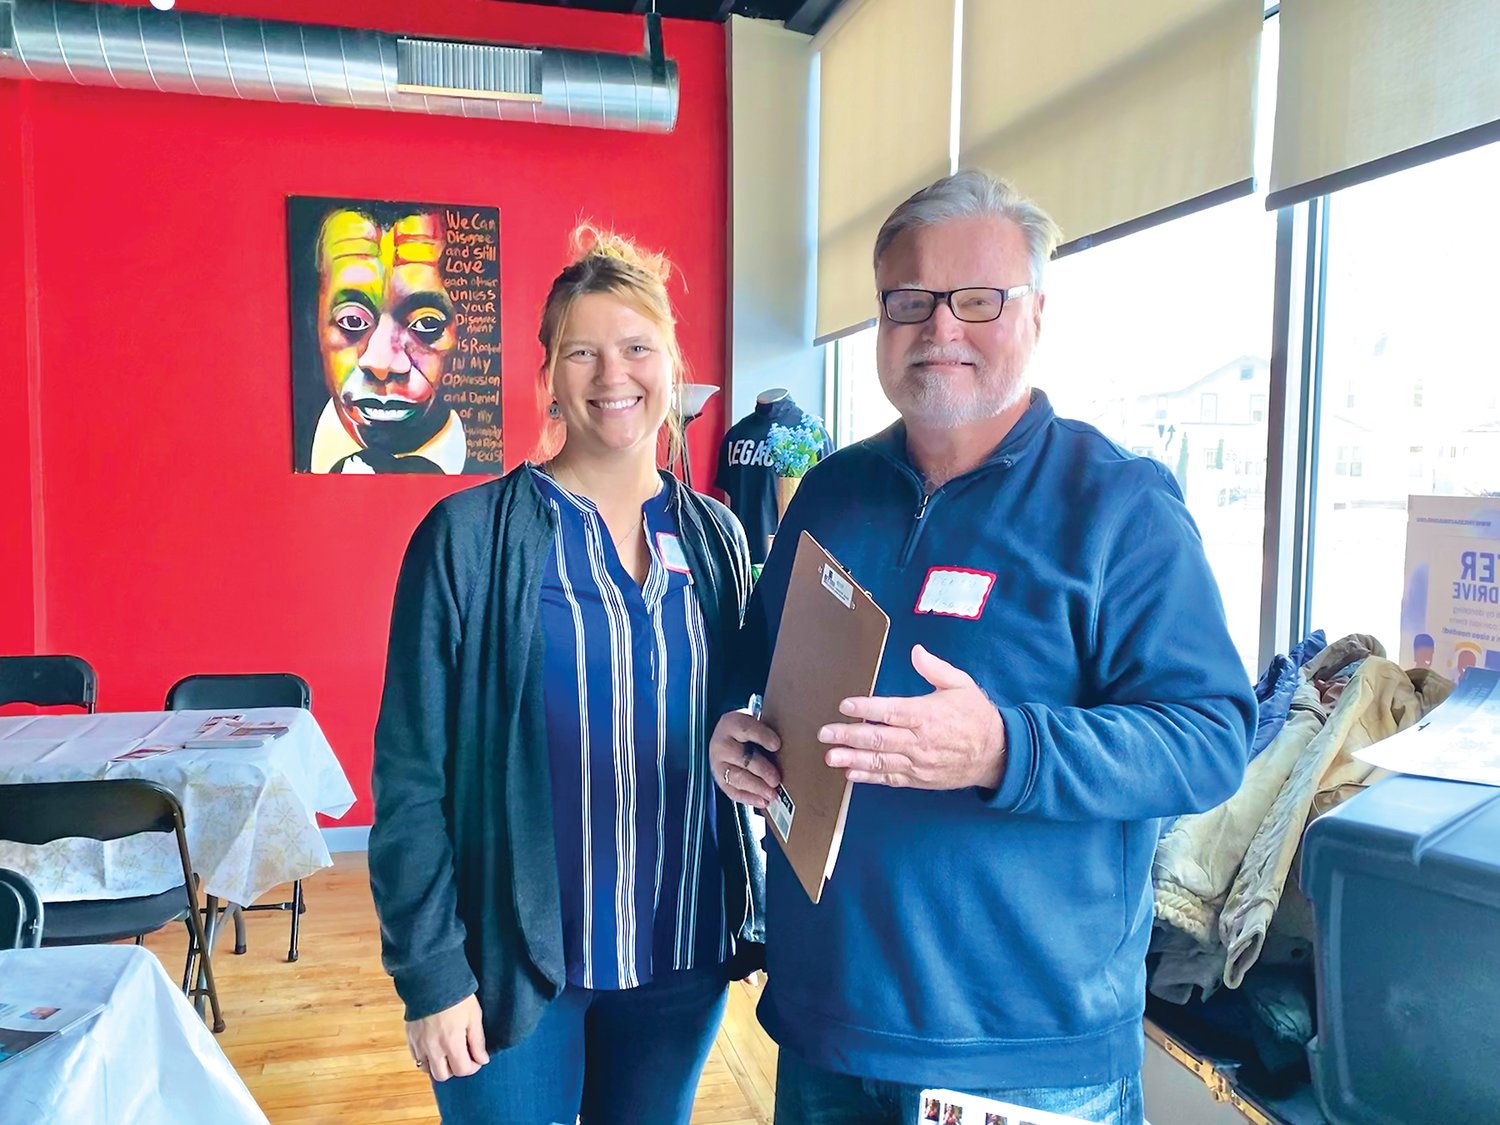 Tesha M. Christensen (left) and Denis Woulfe of the Longfellow Nokomis Messenger check in attendees at the Dec. 8 LBA luncheon at the Legacy Building as the LBA returns to in person events after a hiatus during the pandemic. Woulfe has been on the LBA board since 2019.